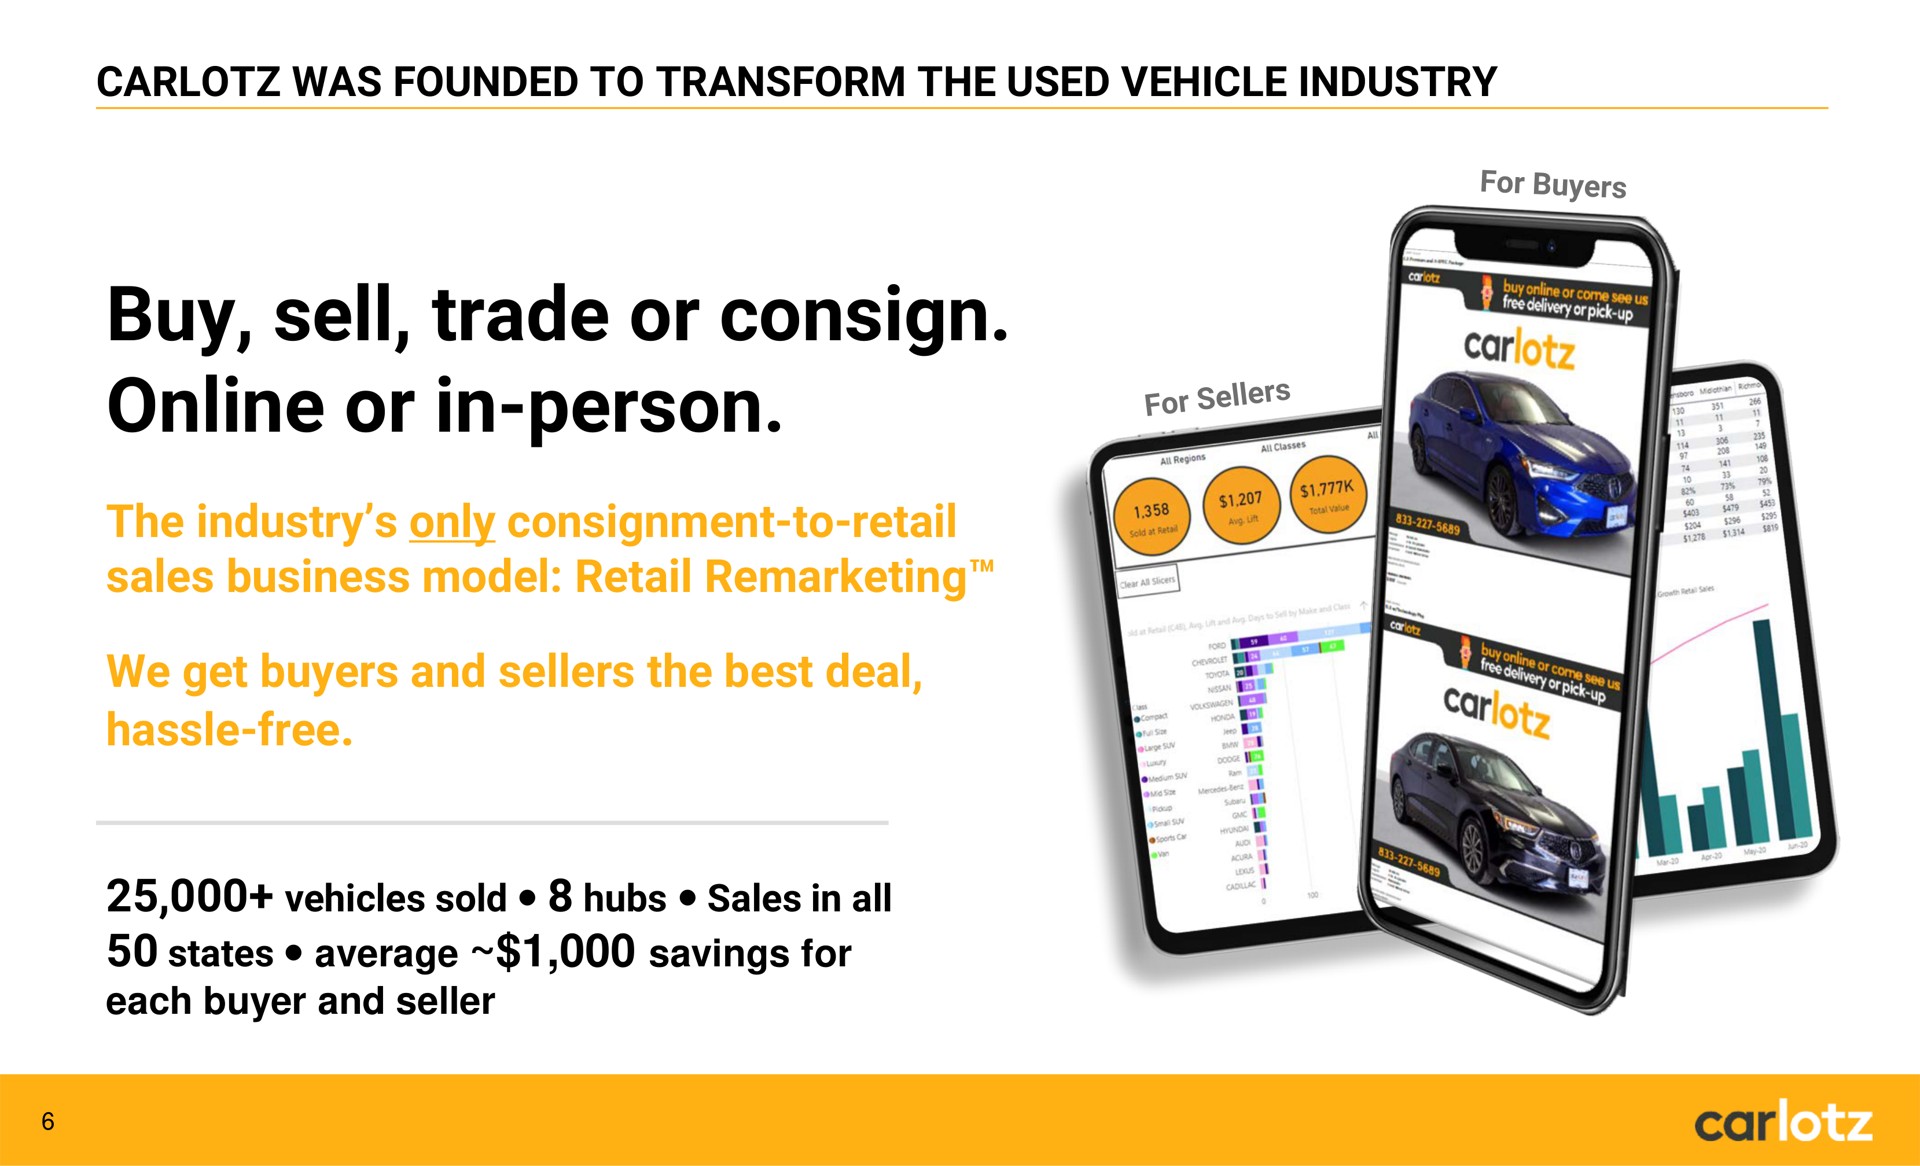 was founded to transform the used vehicle industry buy sell trade or consign or in person the industry only consignment to retail sales business model retail we get buyers and sellers the best deal hassle free vehicles sold hubs sales in all states average savings for each buyer and seller car | Carlotz